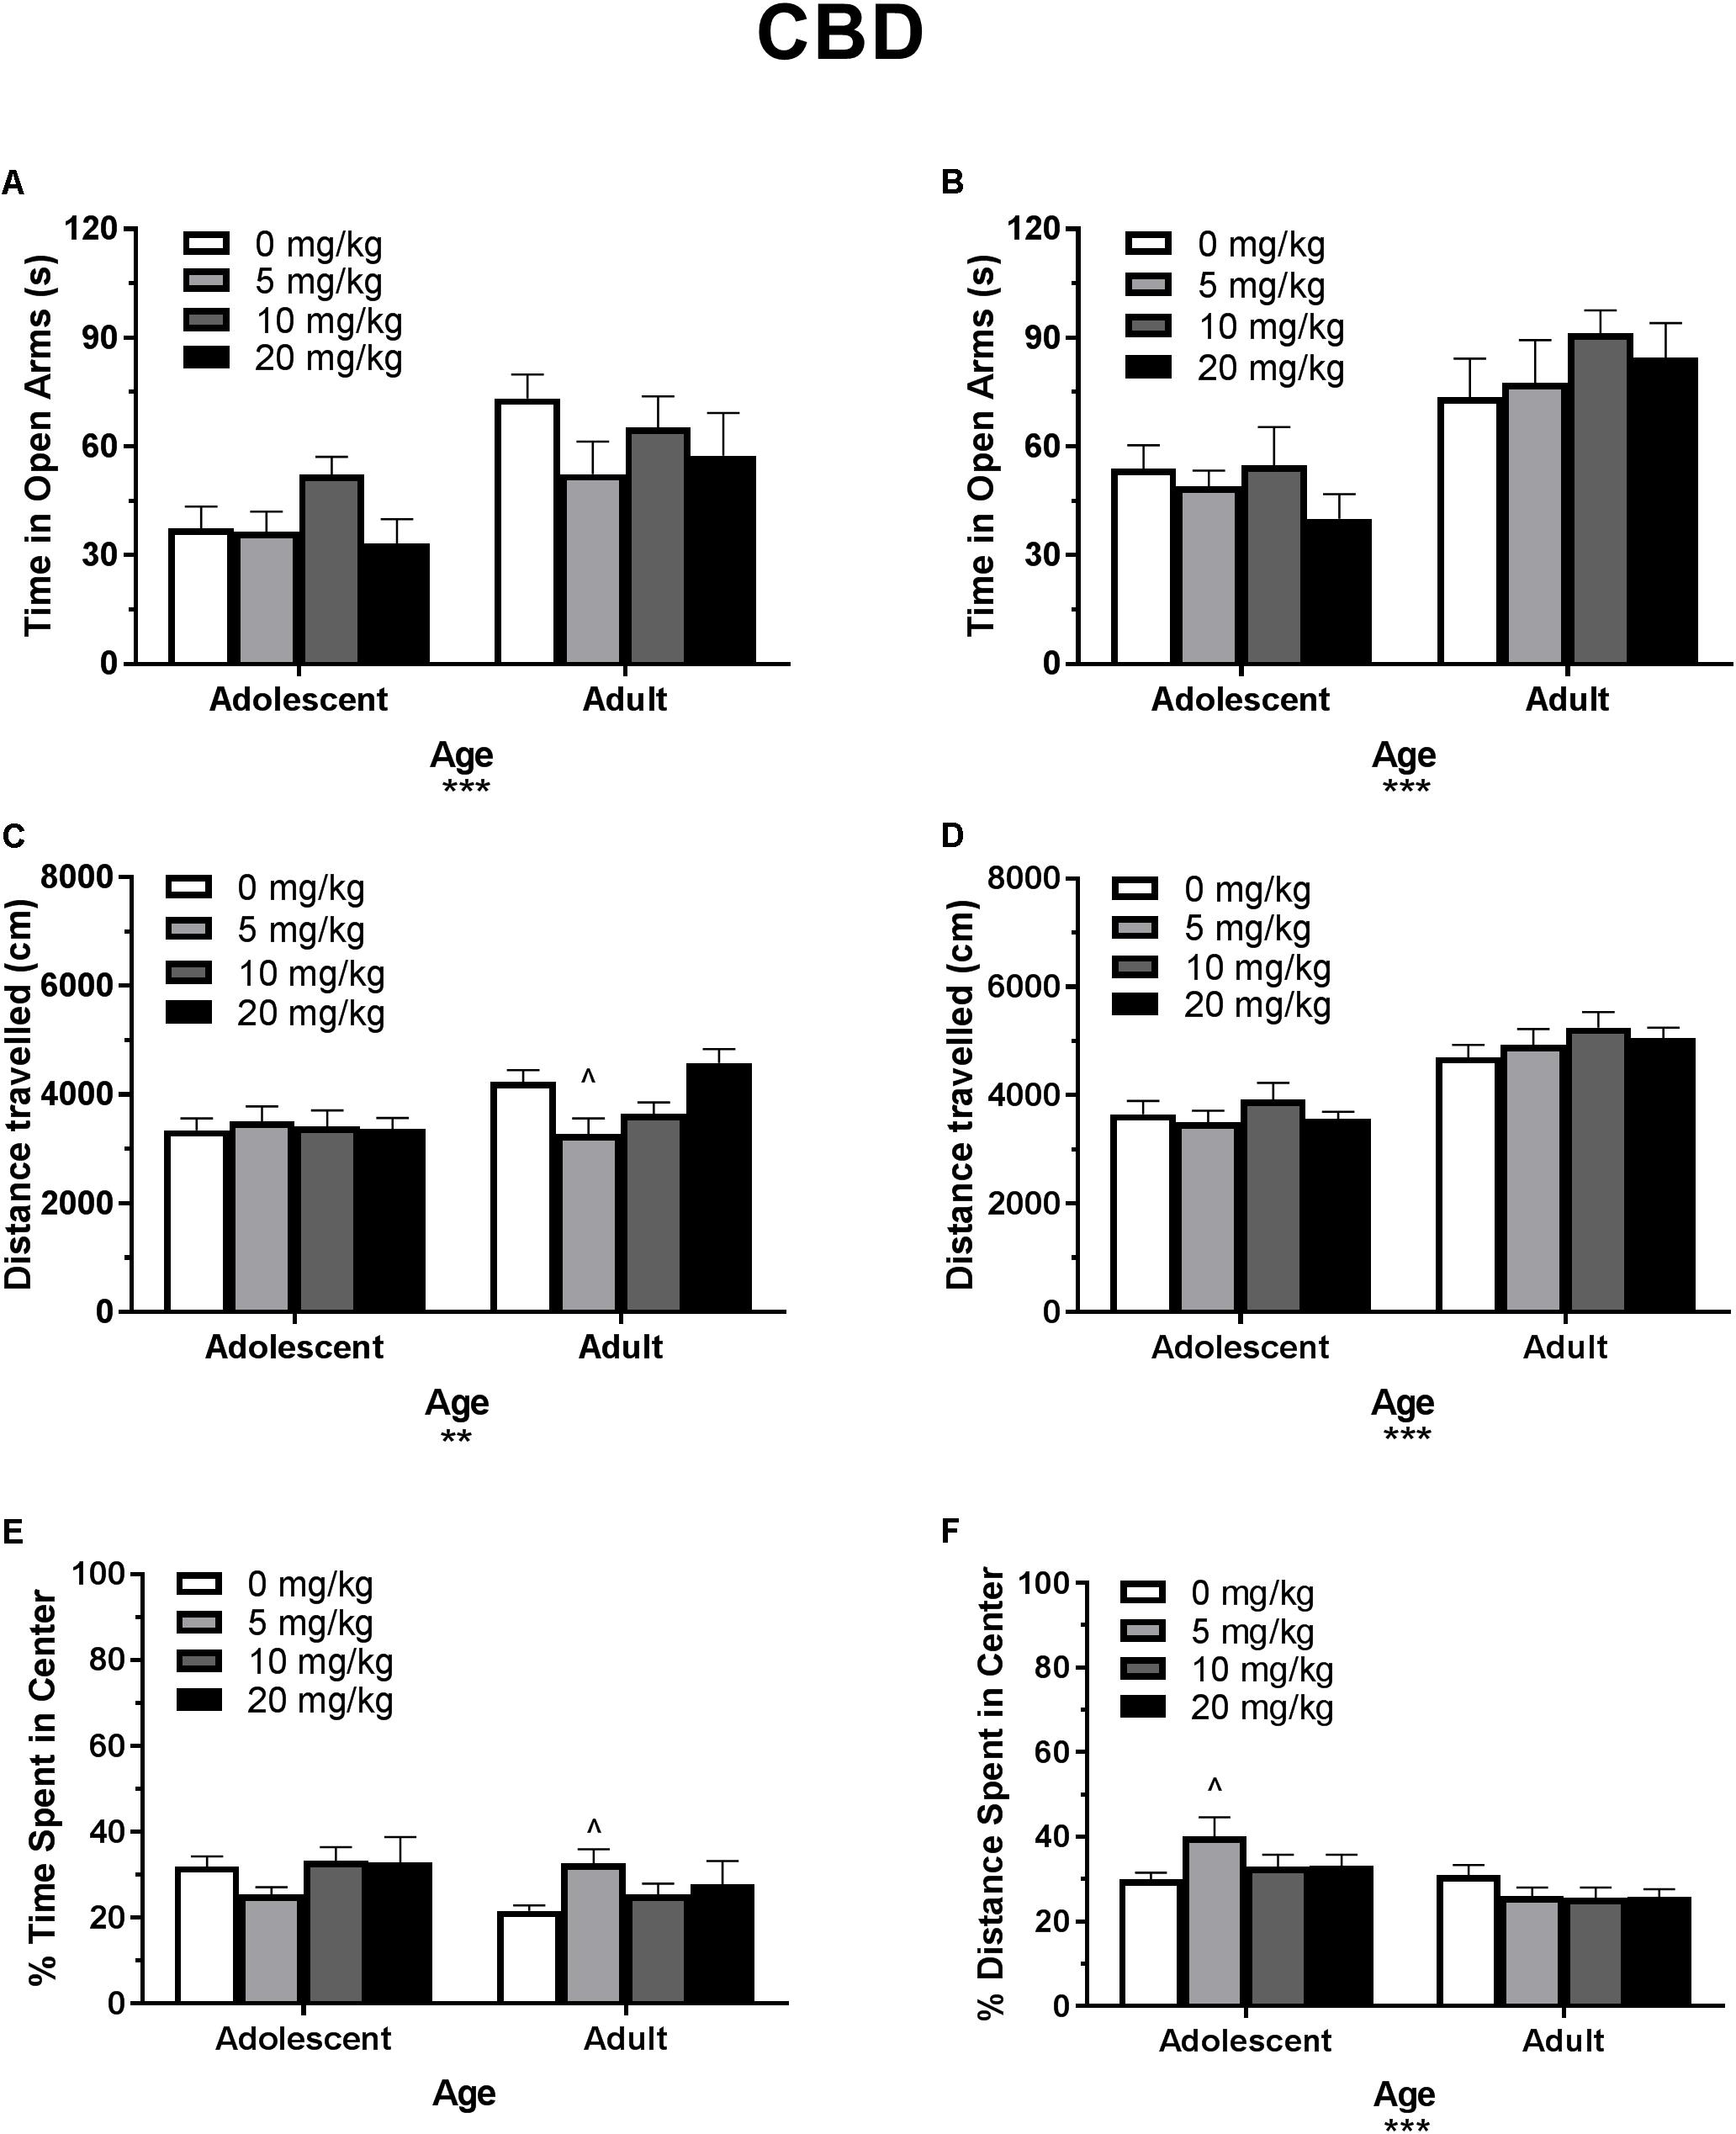 Frontiers | Acute Cannabinoids Produce Robust Anxiety-Like and Locomotor Effects in Mice, but ...